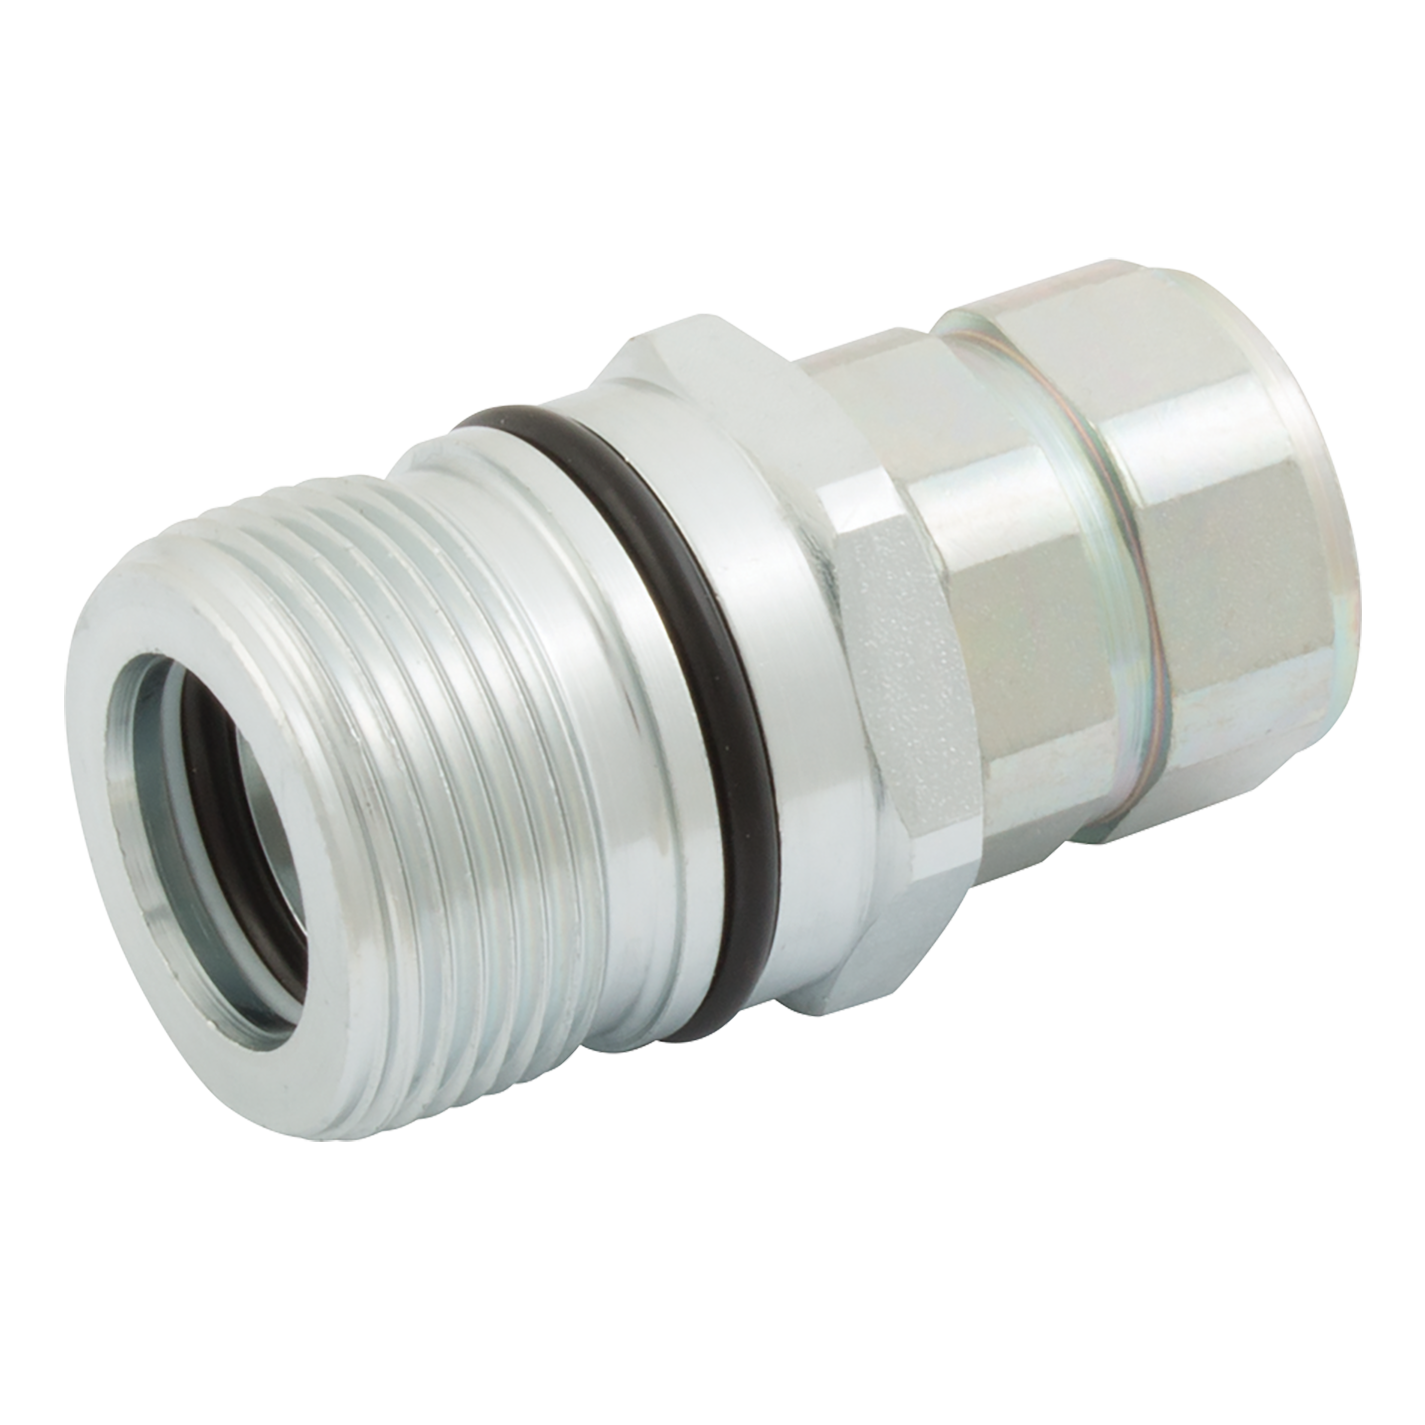 3/4" BSP Female Hydraulic Quick Release Coupling